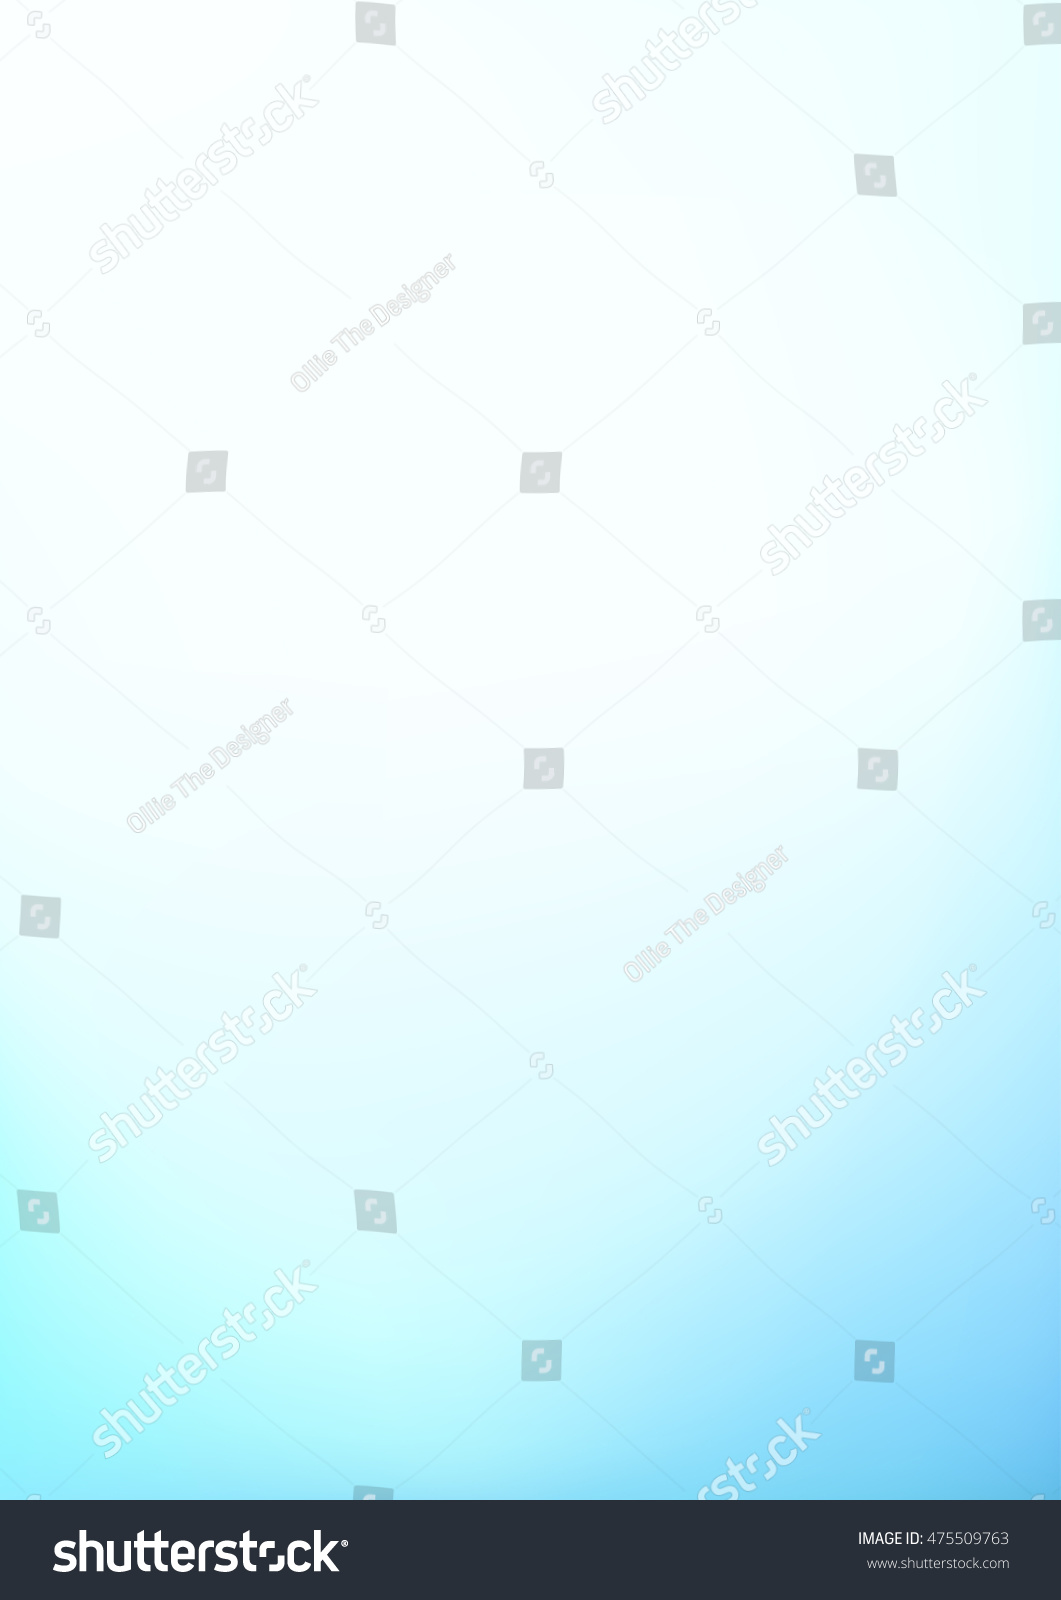 Abstract Light Blue Blurred Vector Portrait Stock Vector 475509763